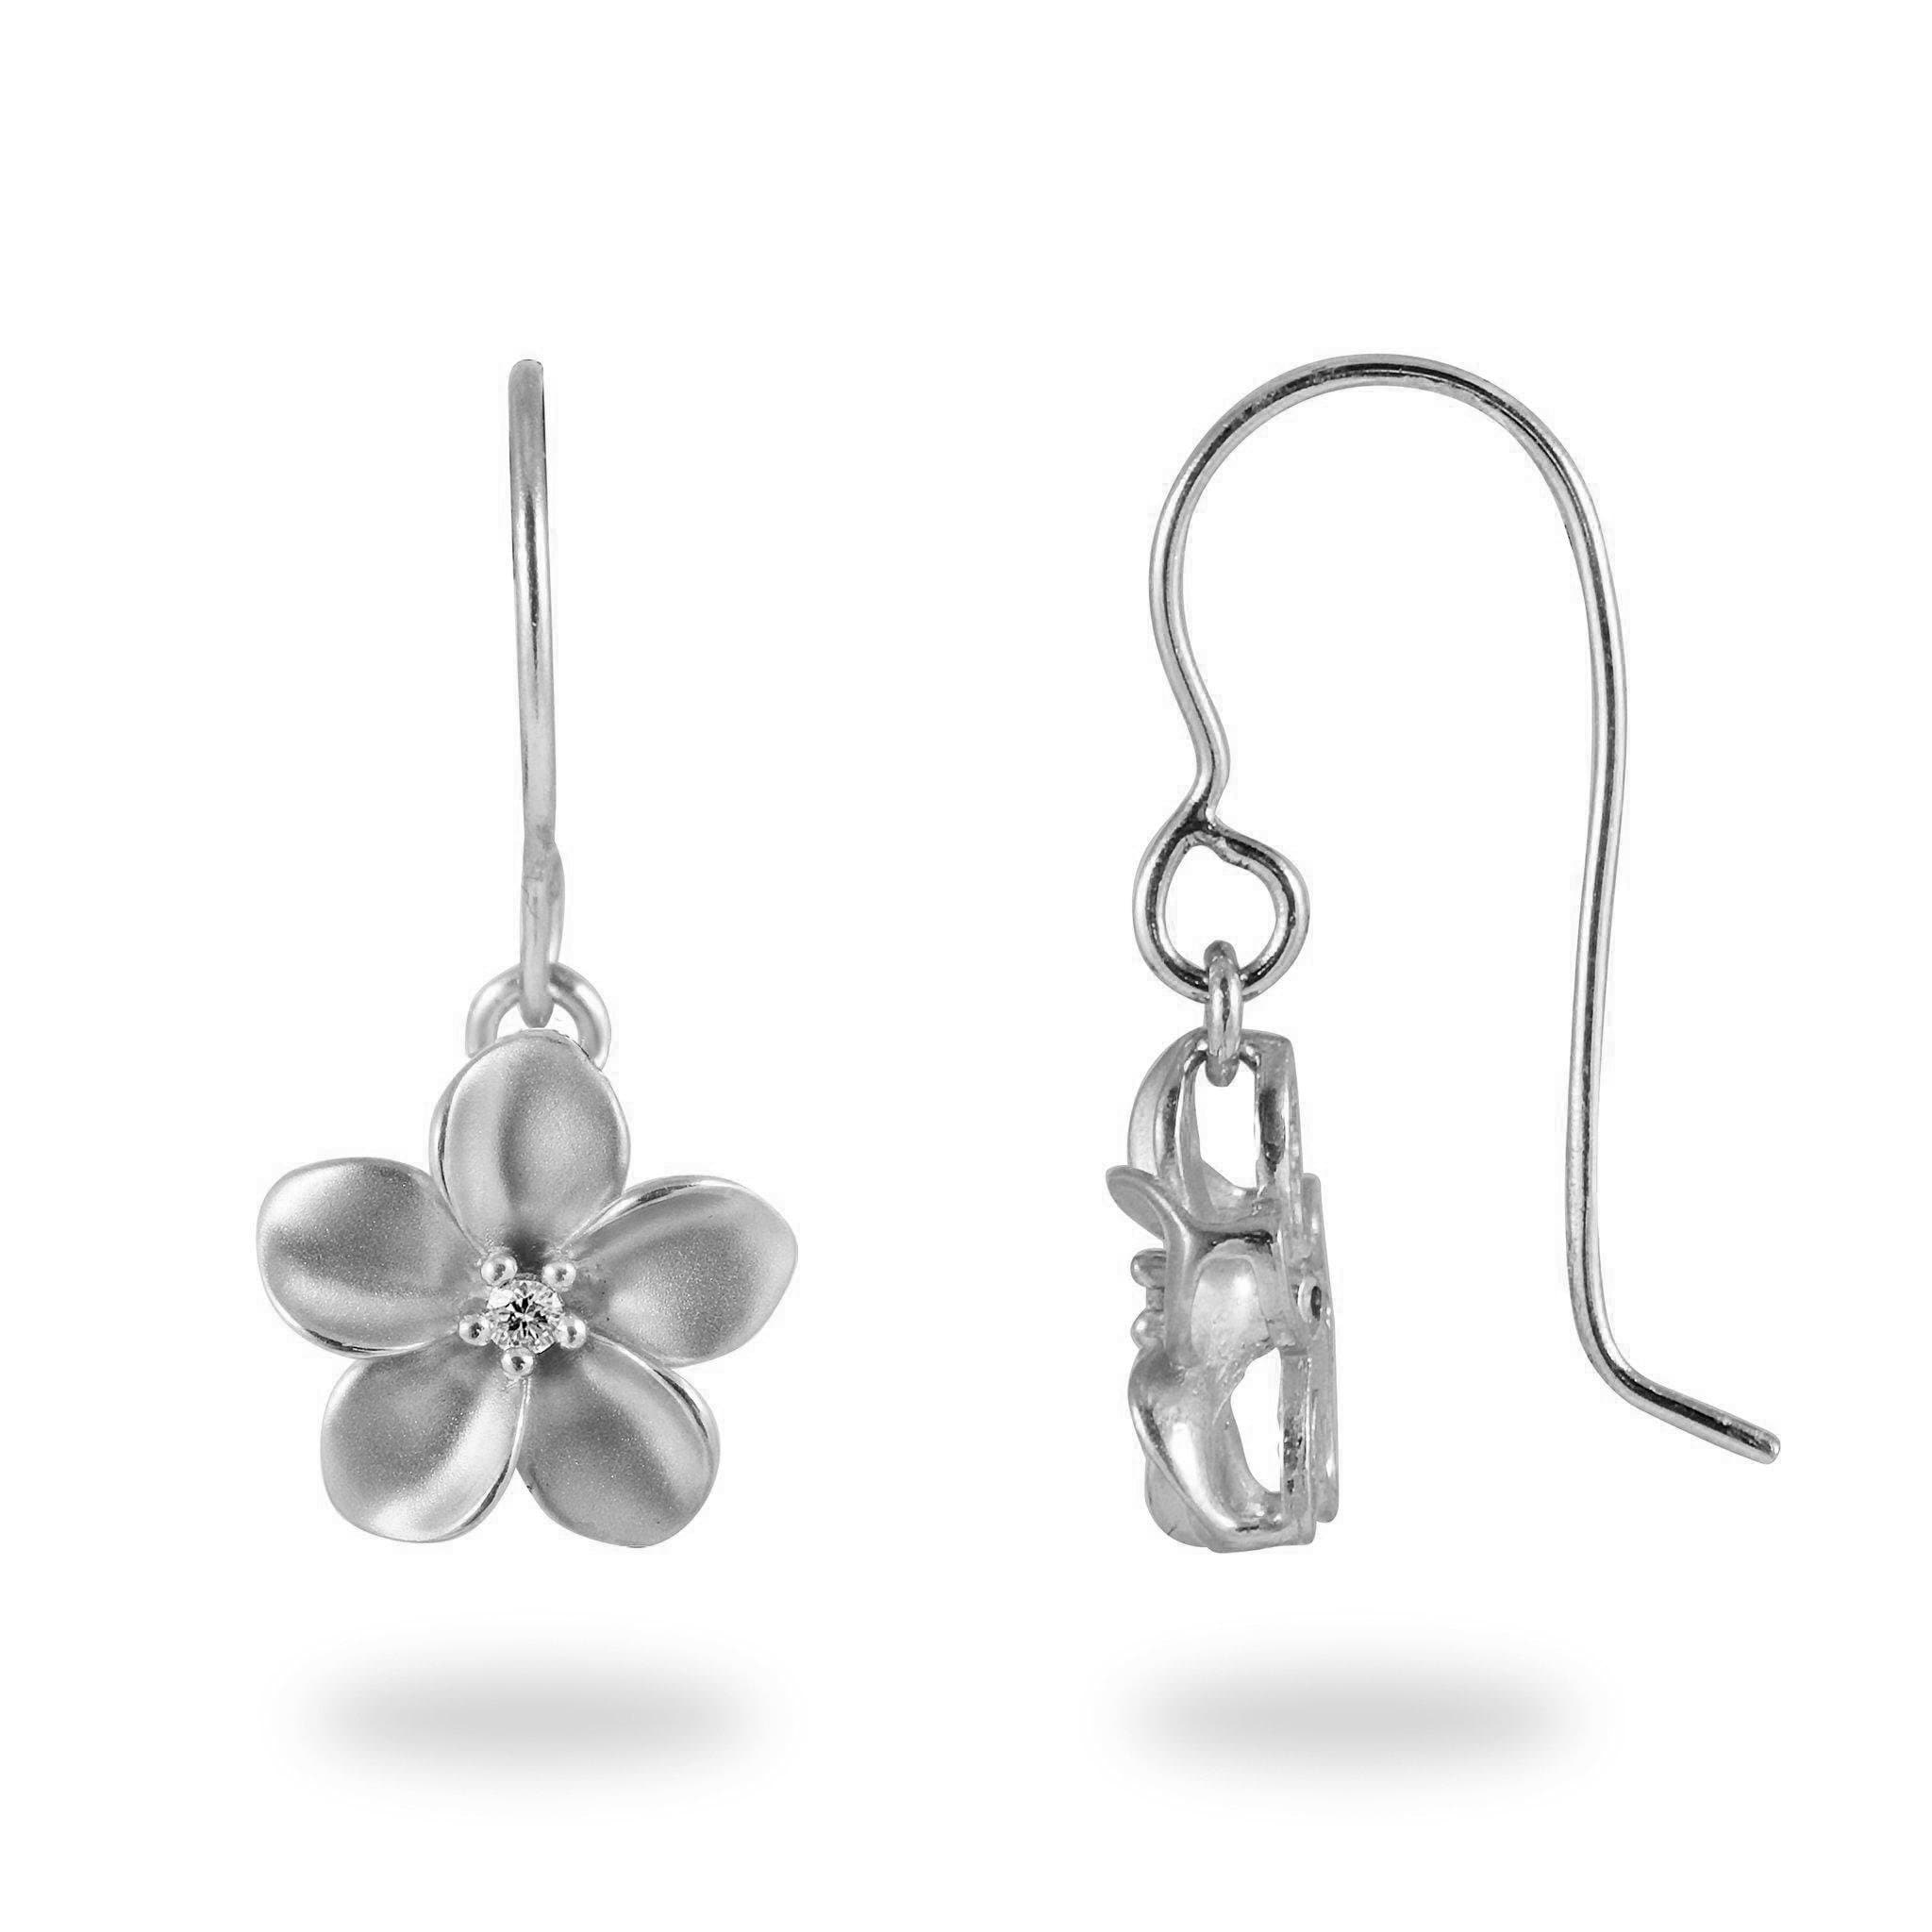 Plumeria Earrings in White Gold with Diamonds - 11mm